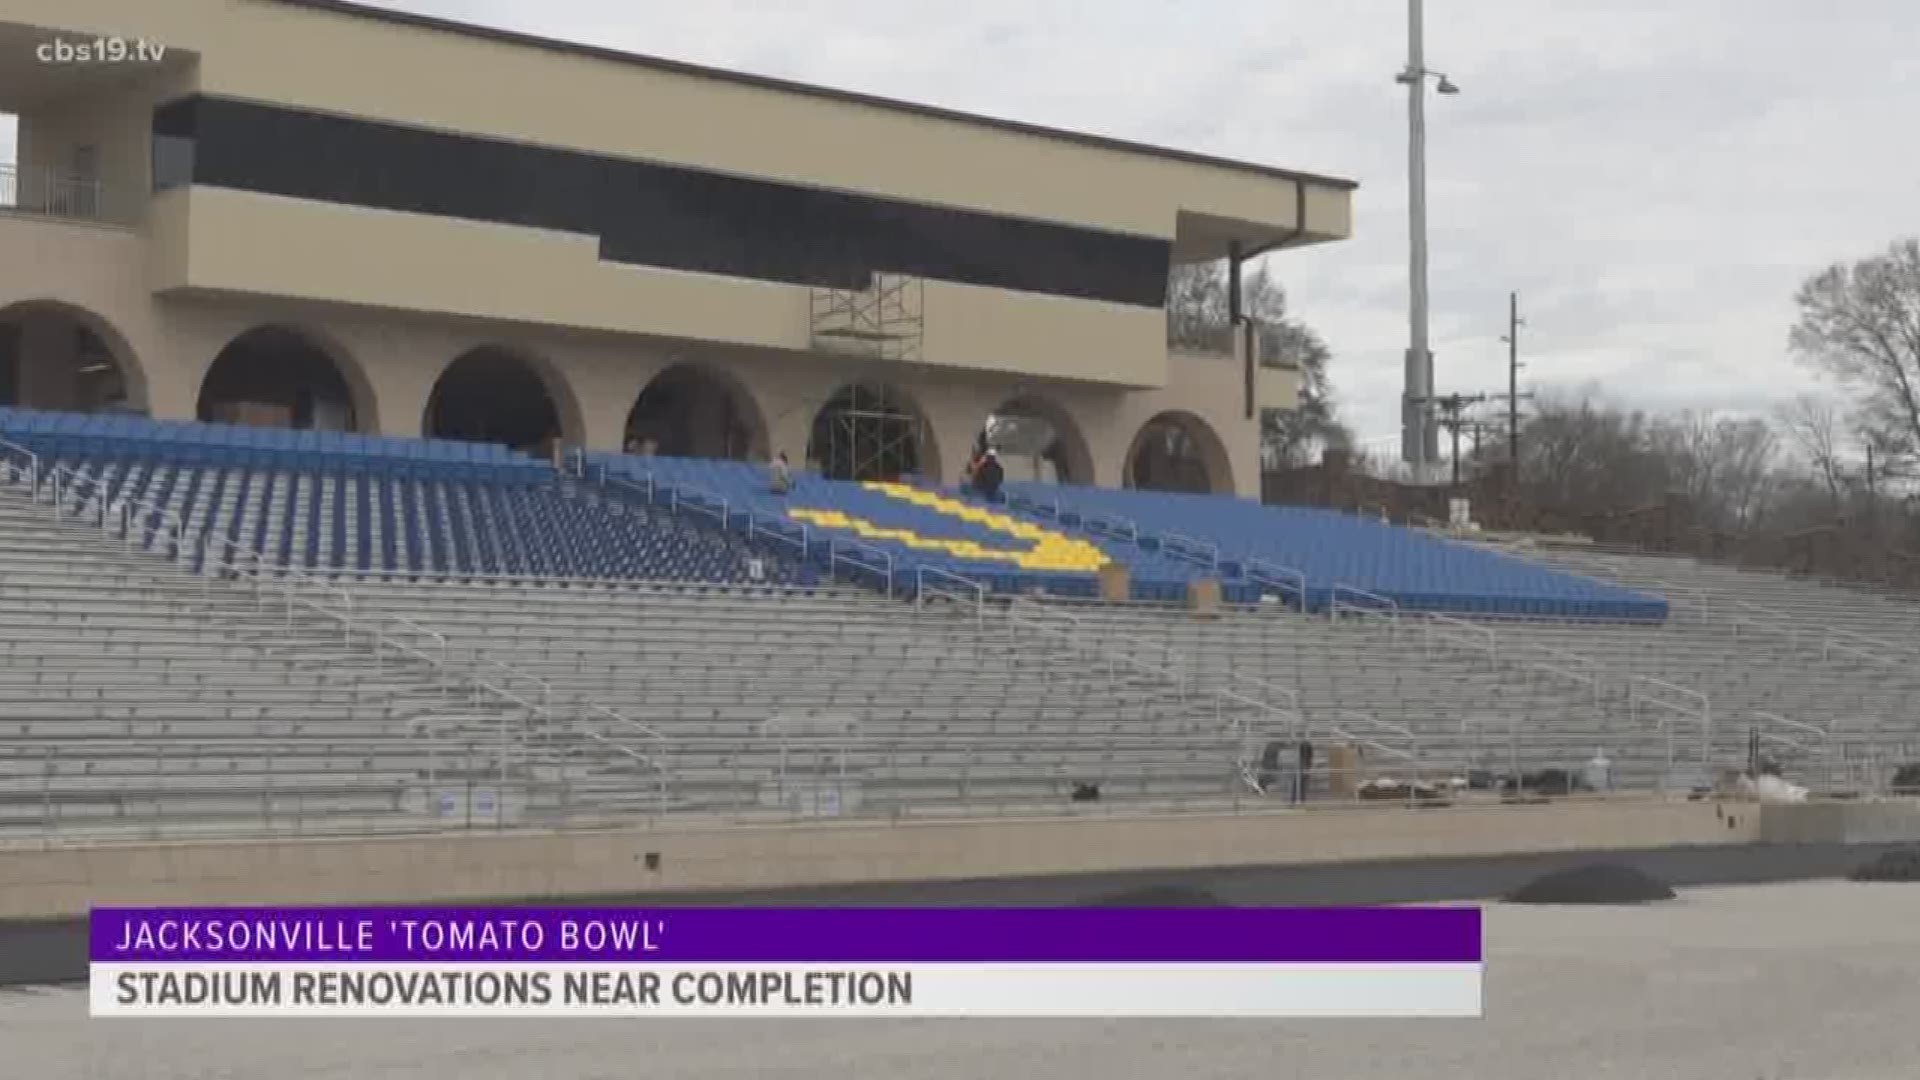 This is only the second time the 80-year-old stadium has undergone renovations, as part of a $20 million bond package.